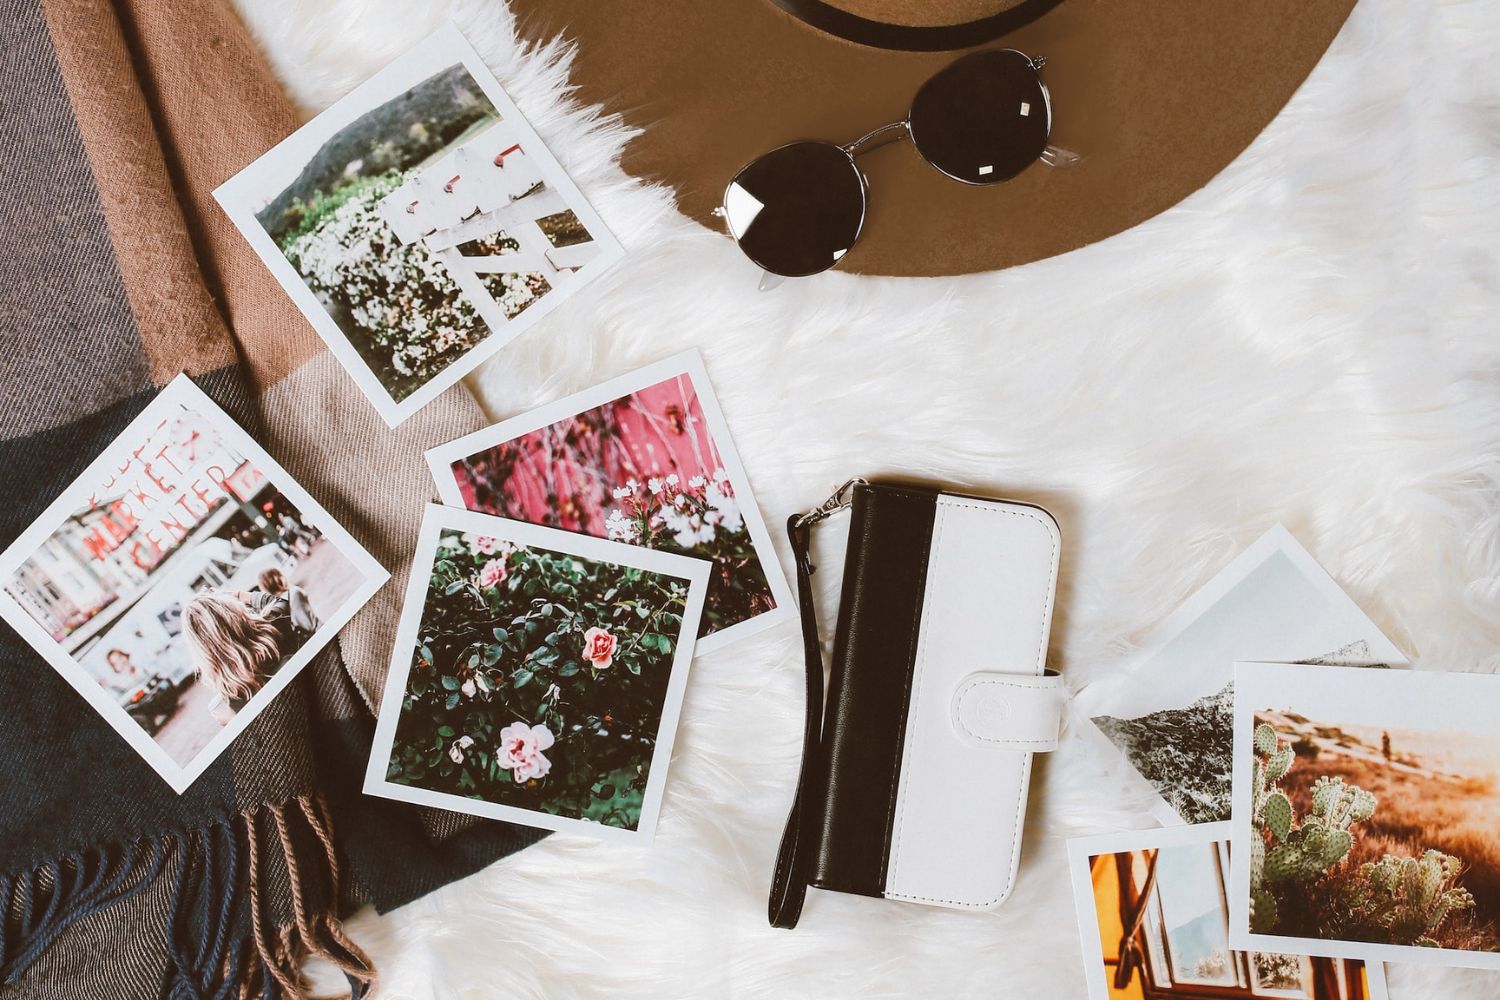 scattered printed photo on white blanket Photo by Clarisse Meyer on Unsplash